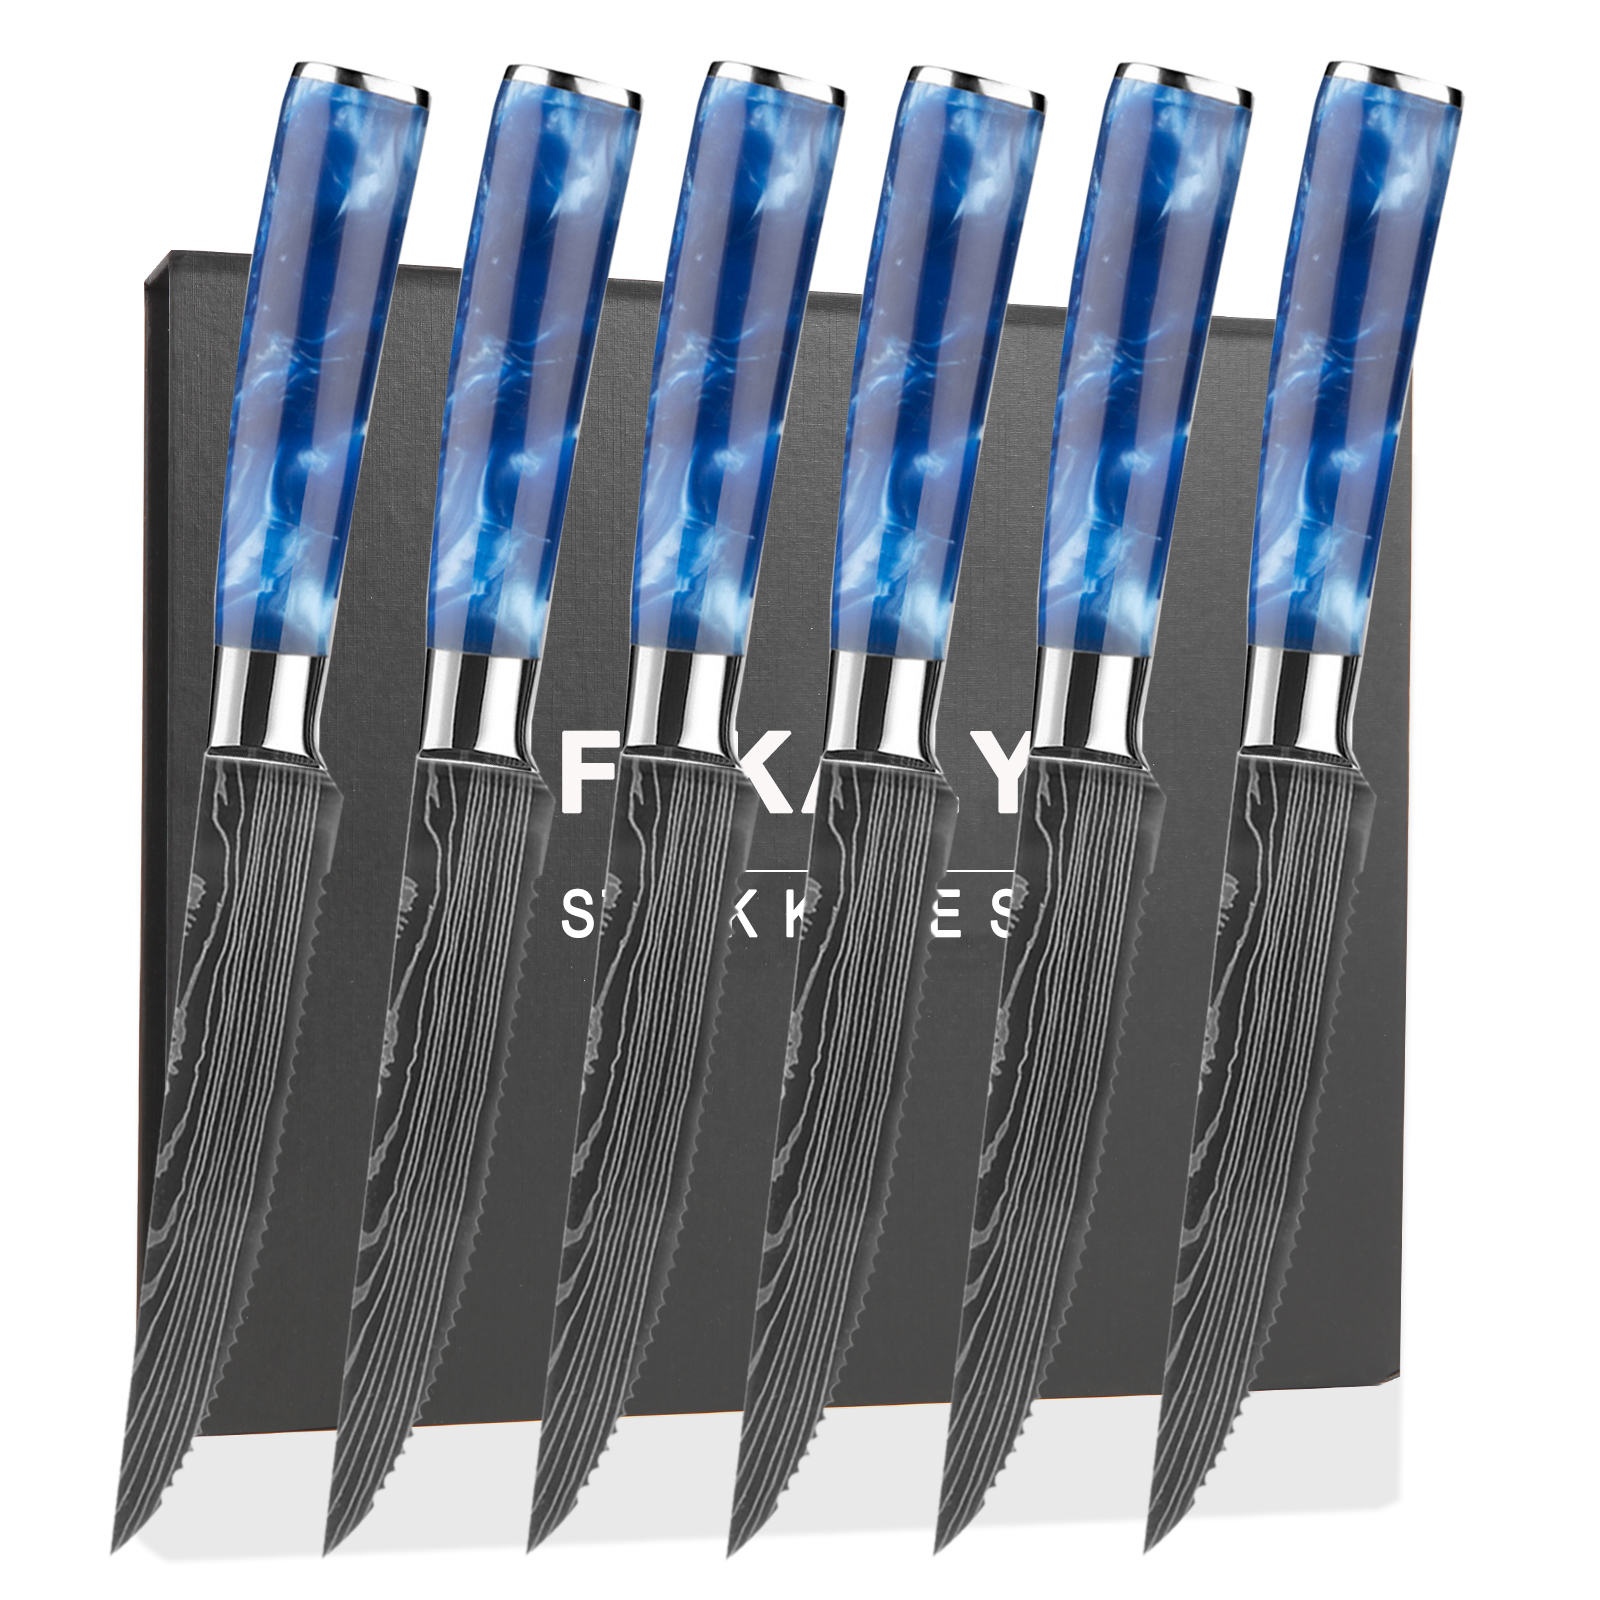 6 Piece Steak Knife Set with Blue Resin Handle